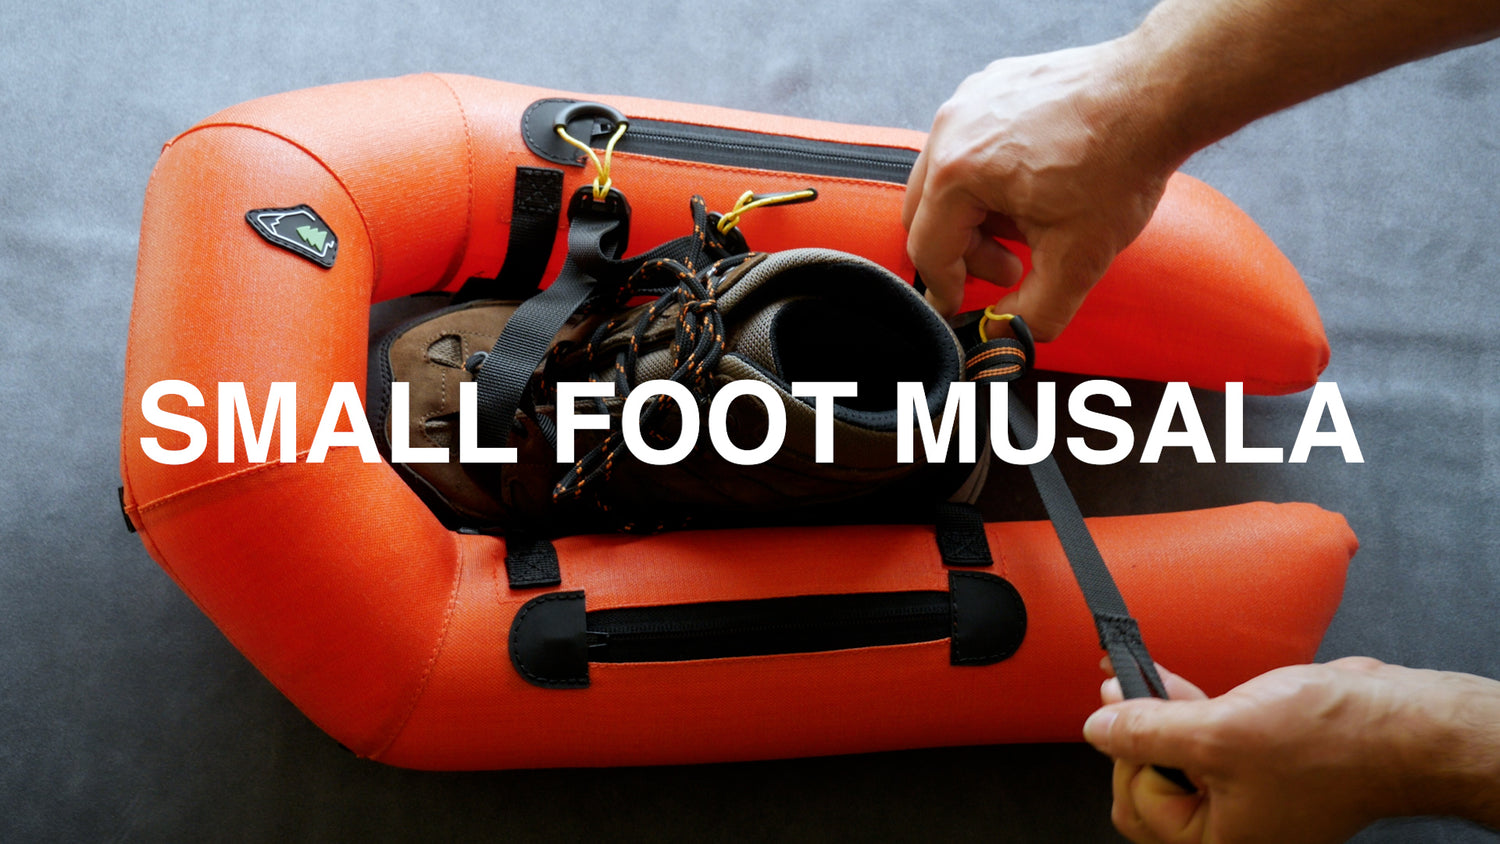 Getting started with Small Foot Musala